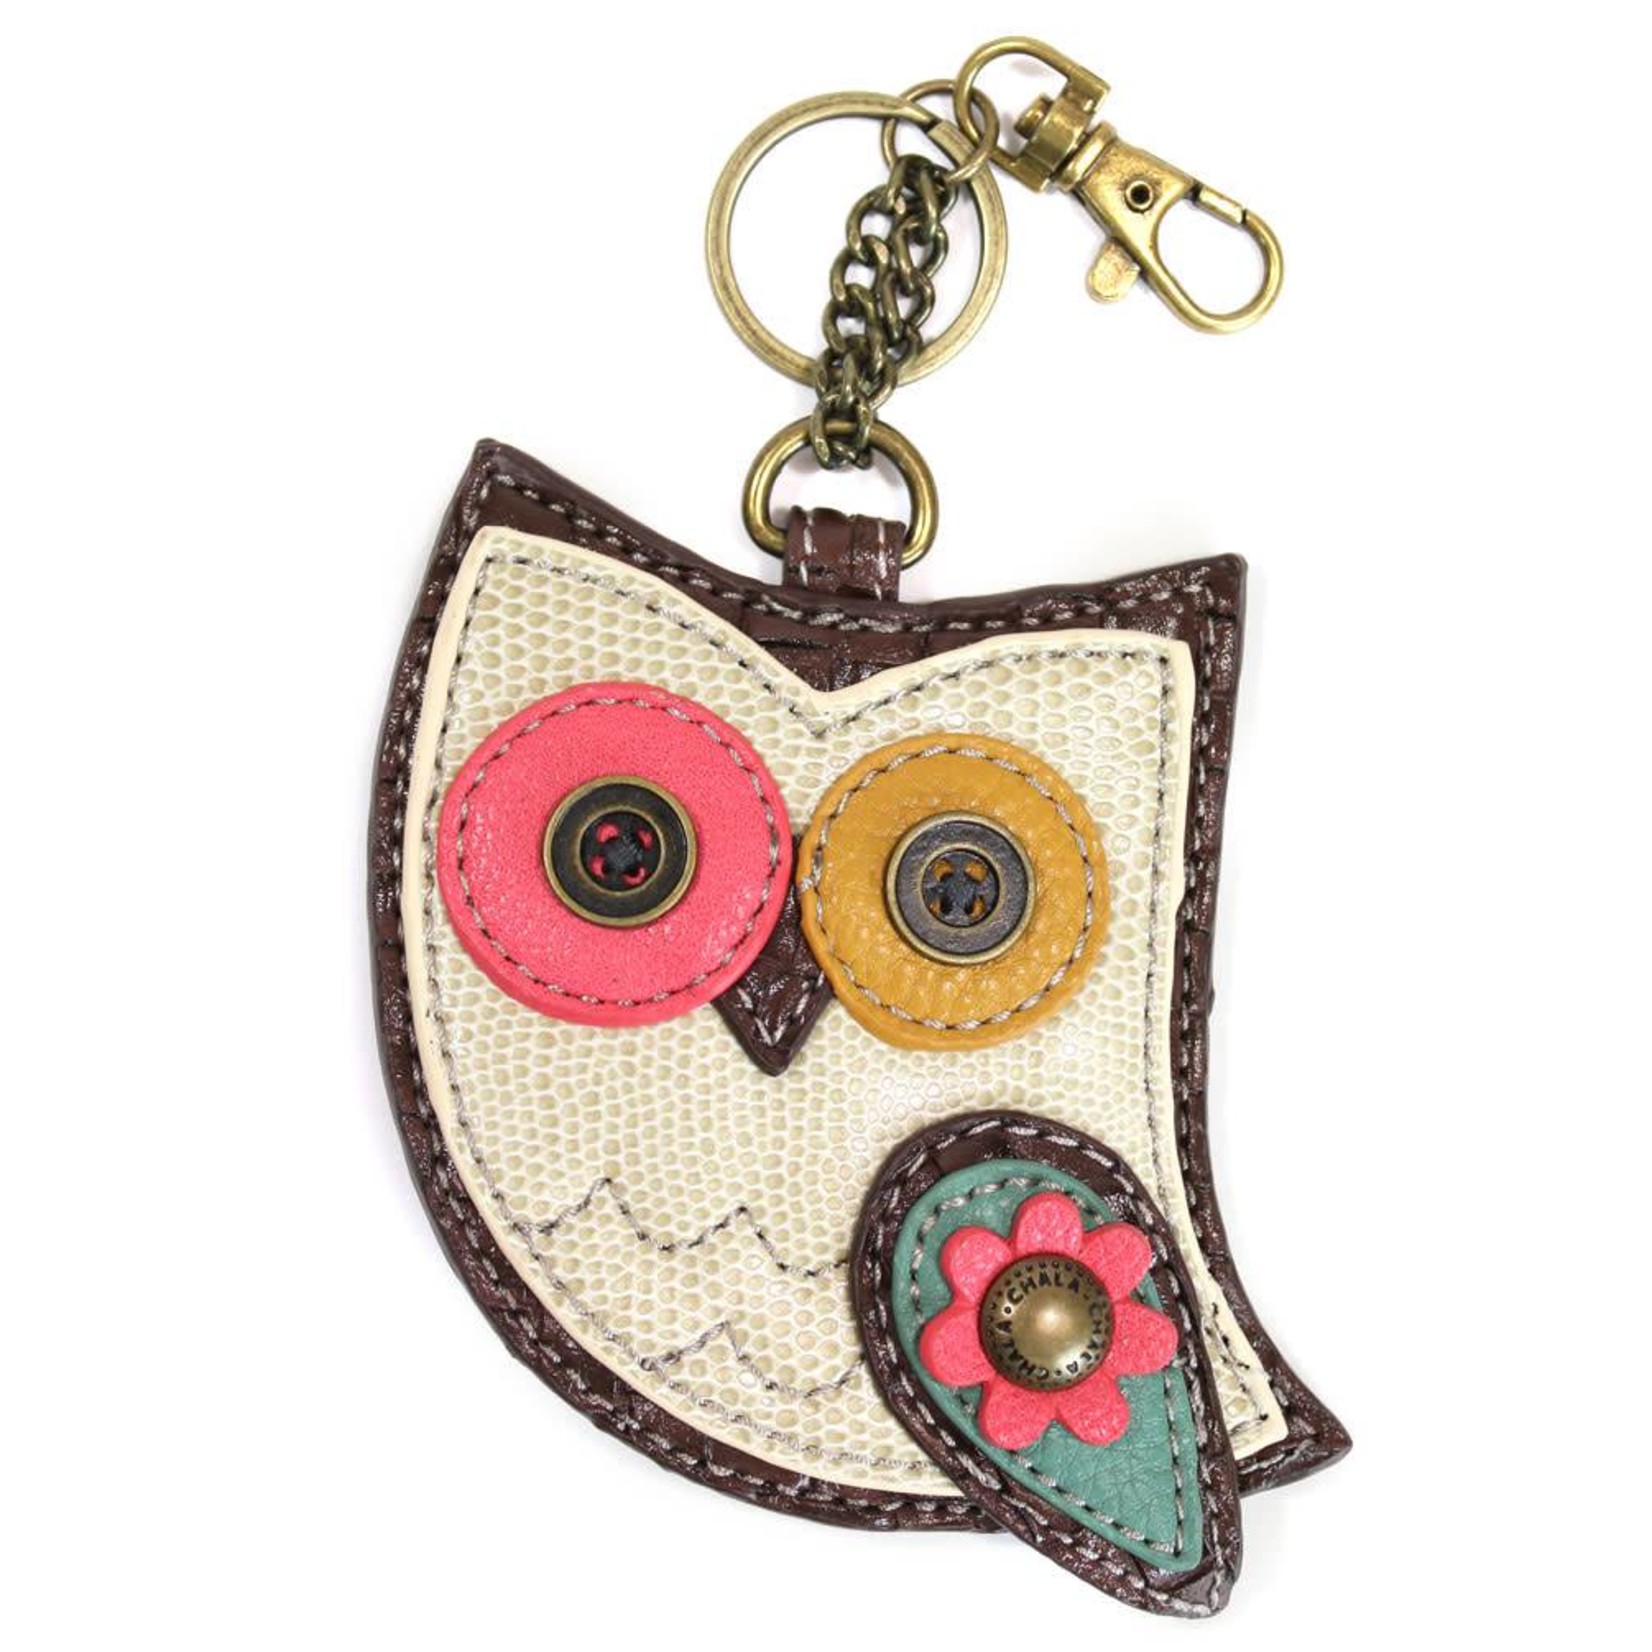 Details about   New Chala Purse Bag Charm Clip On Key Ring FOB Coin Purse  HOOHOO OWL cute gift 